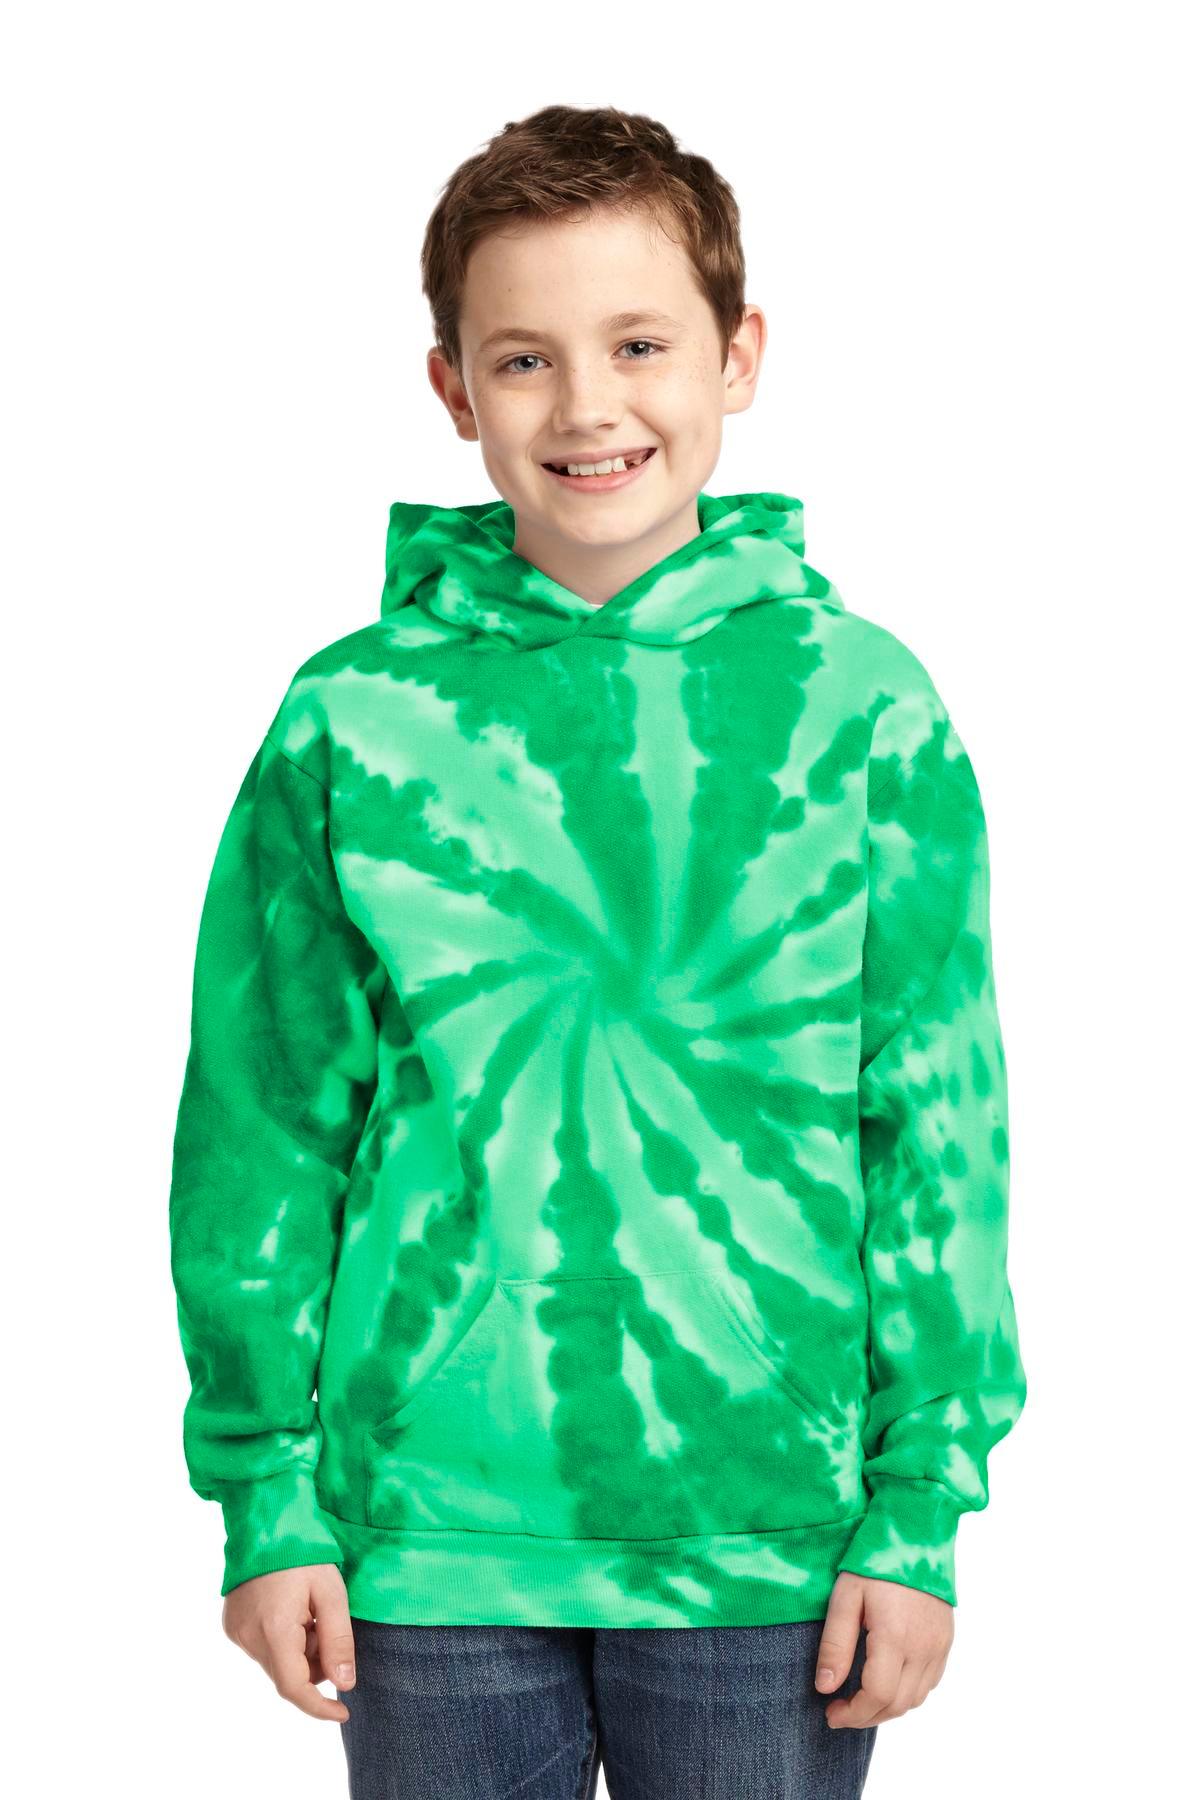 Port & Company Youth Tie-Dye Pullover Hooded Sweatshirt. PC146Y - Dresses Max